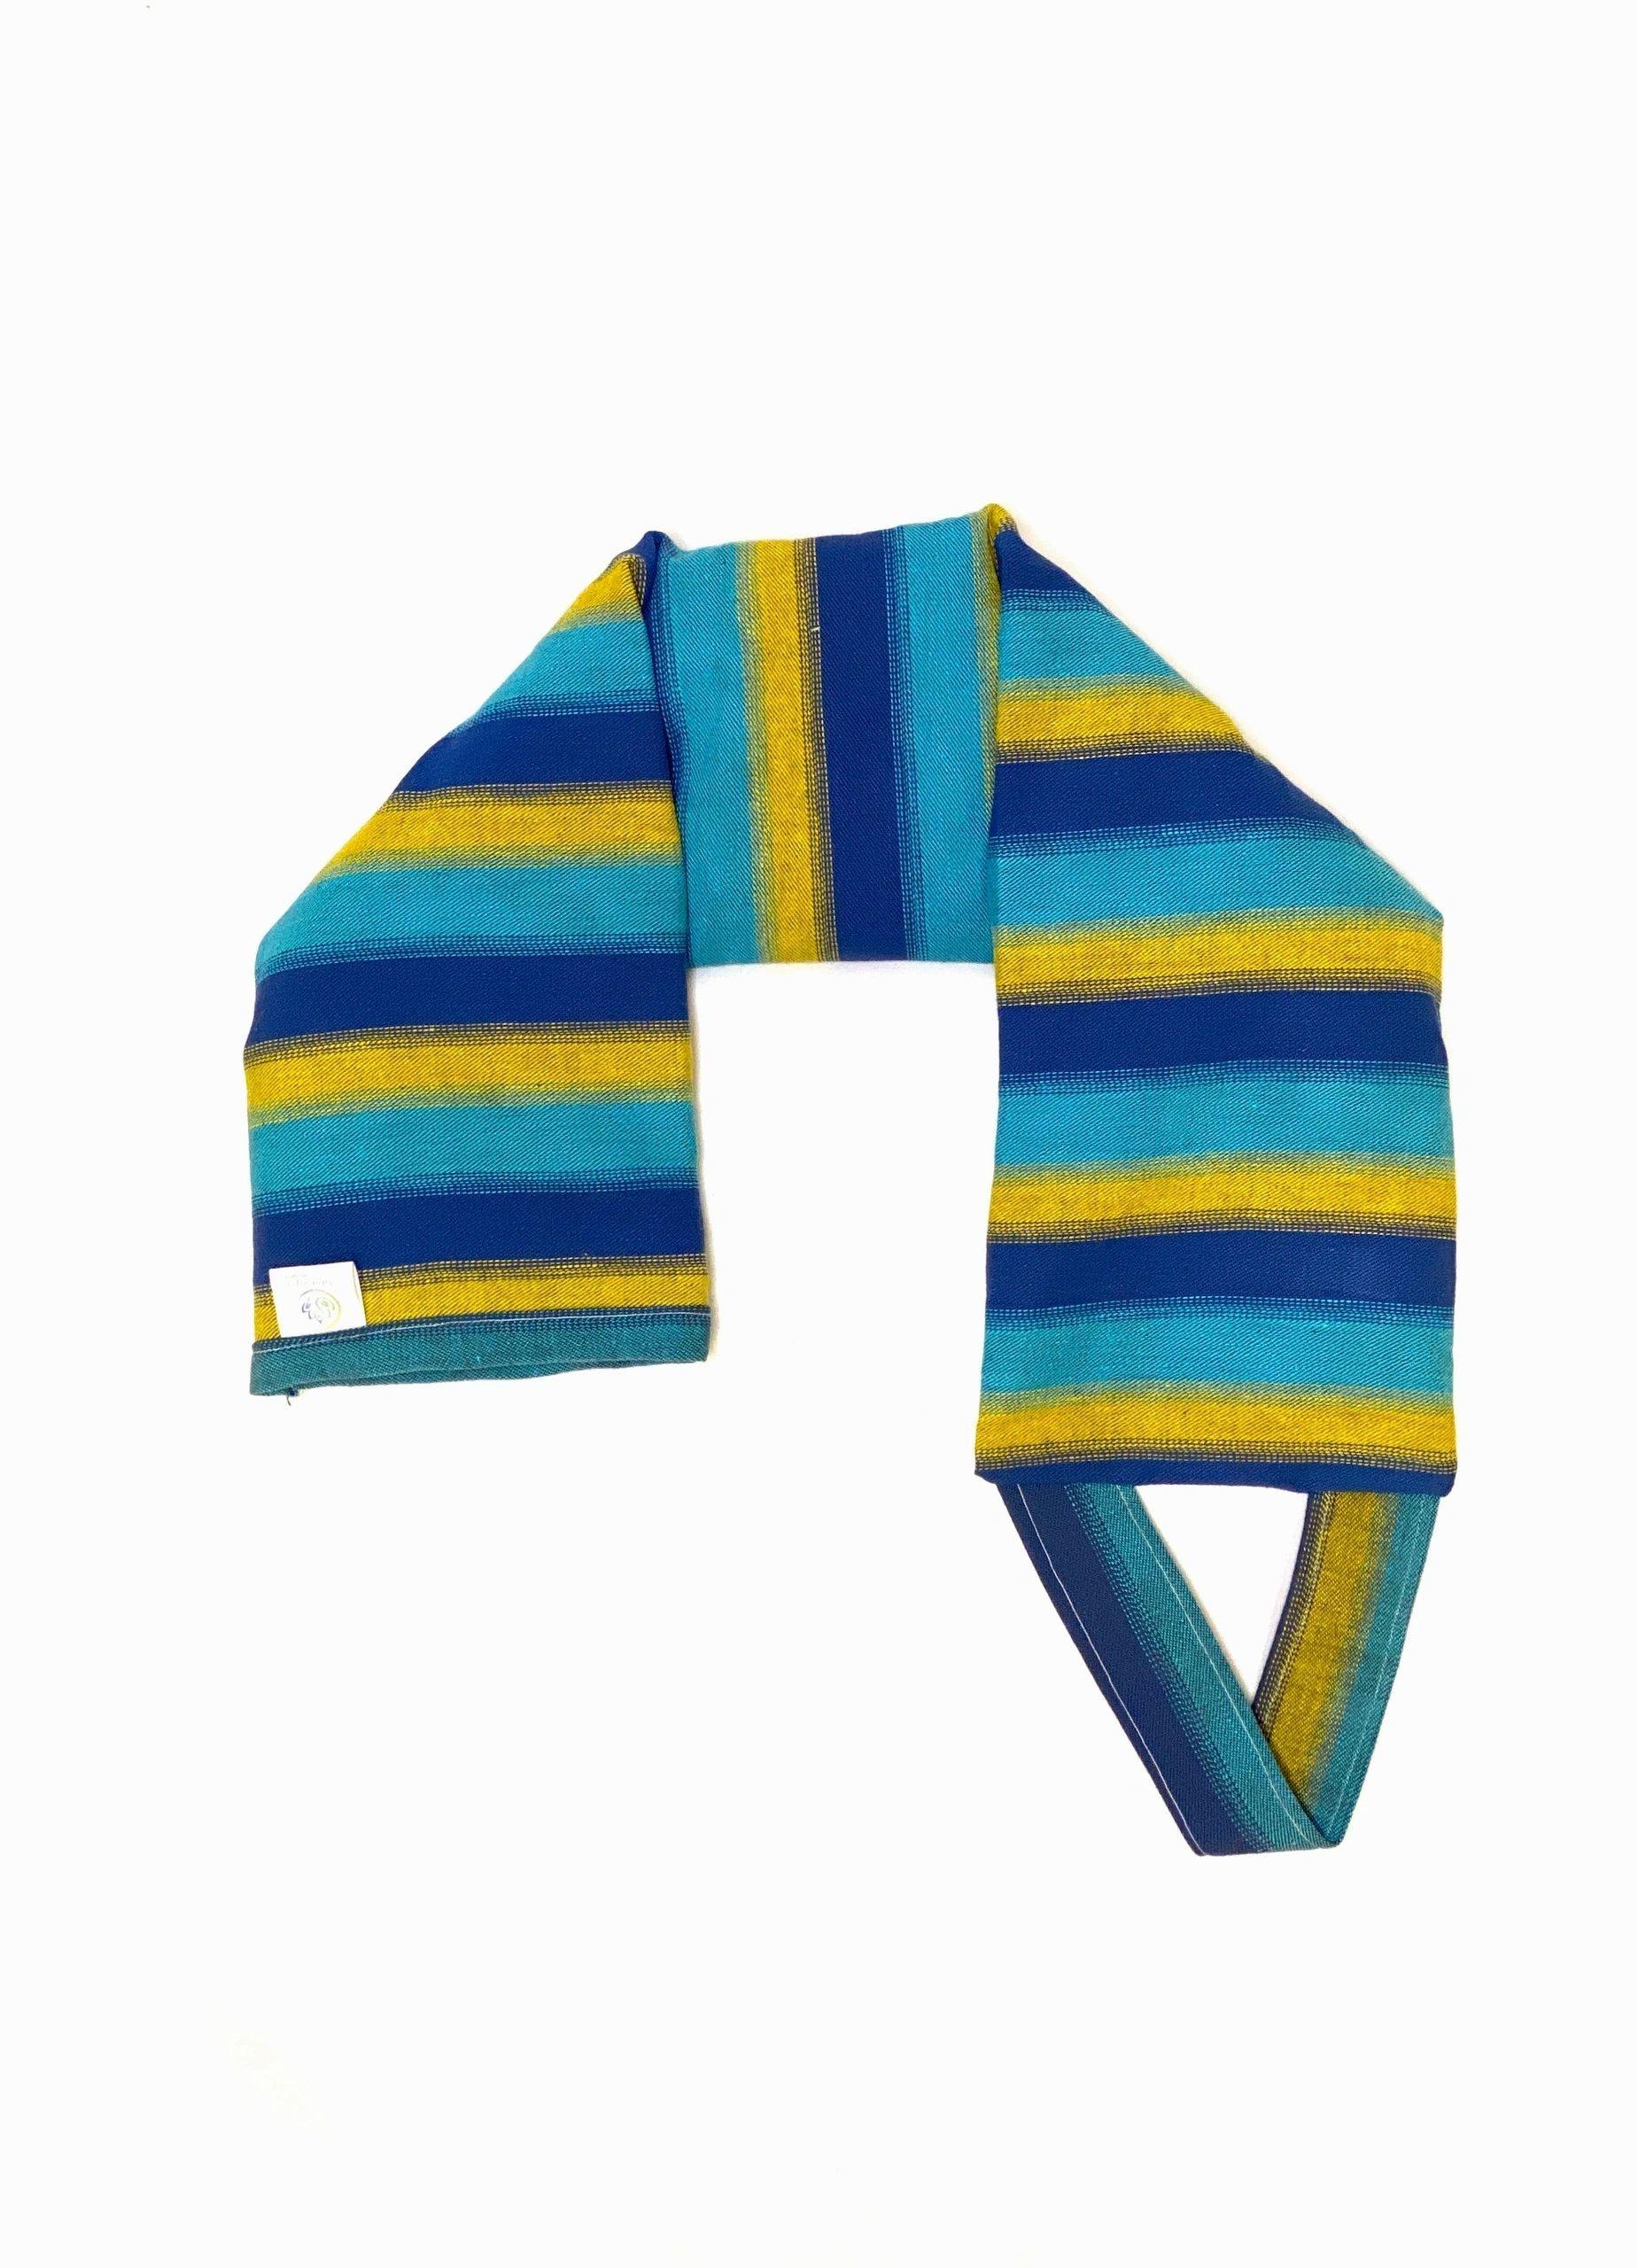 Hot + Cold Therapy Compress Pack- Stripes - The Sankalpa Project